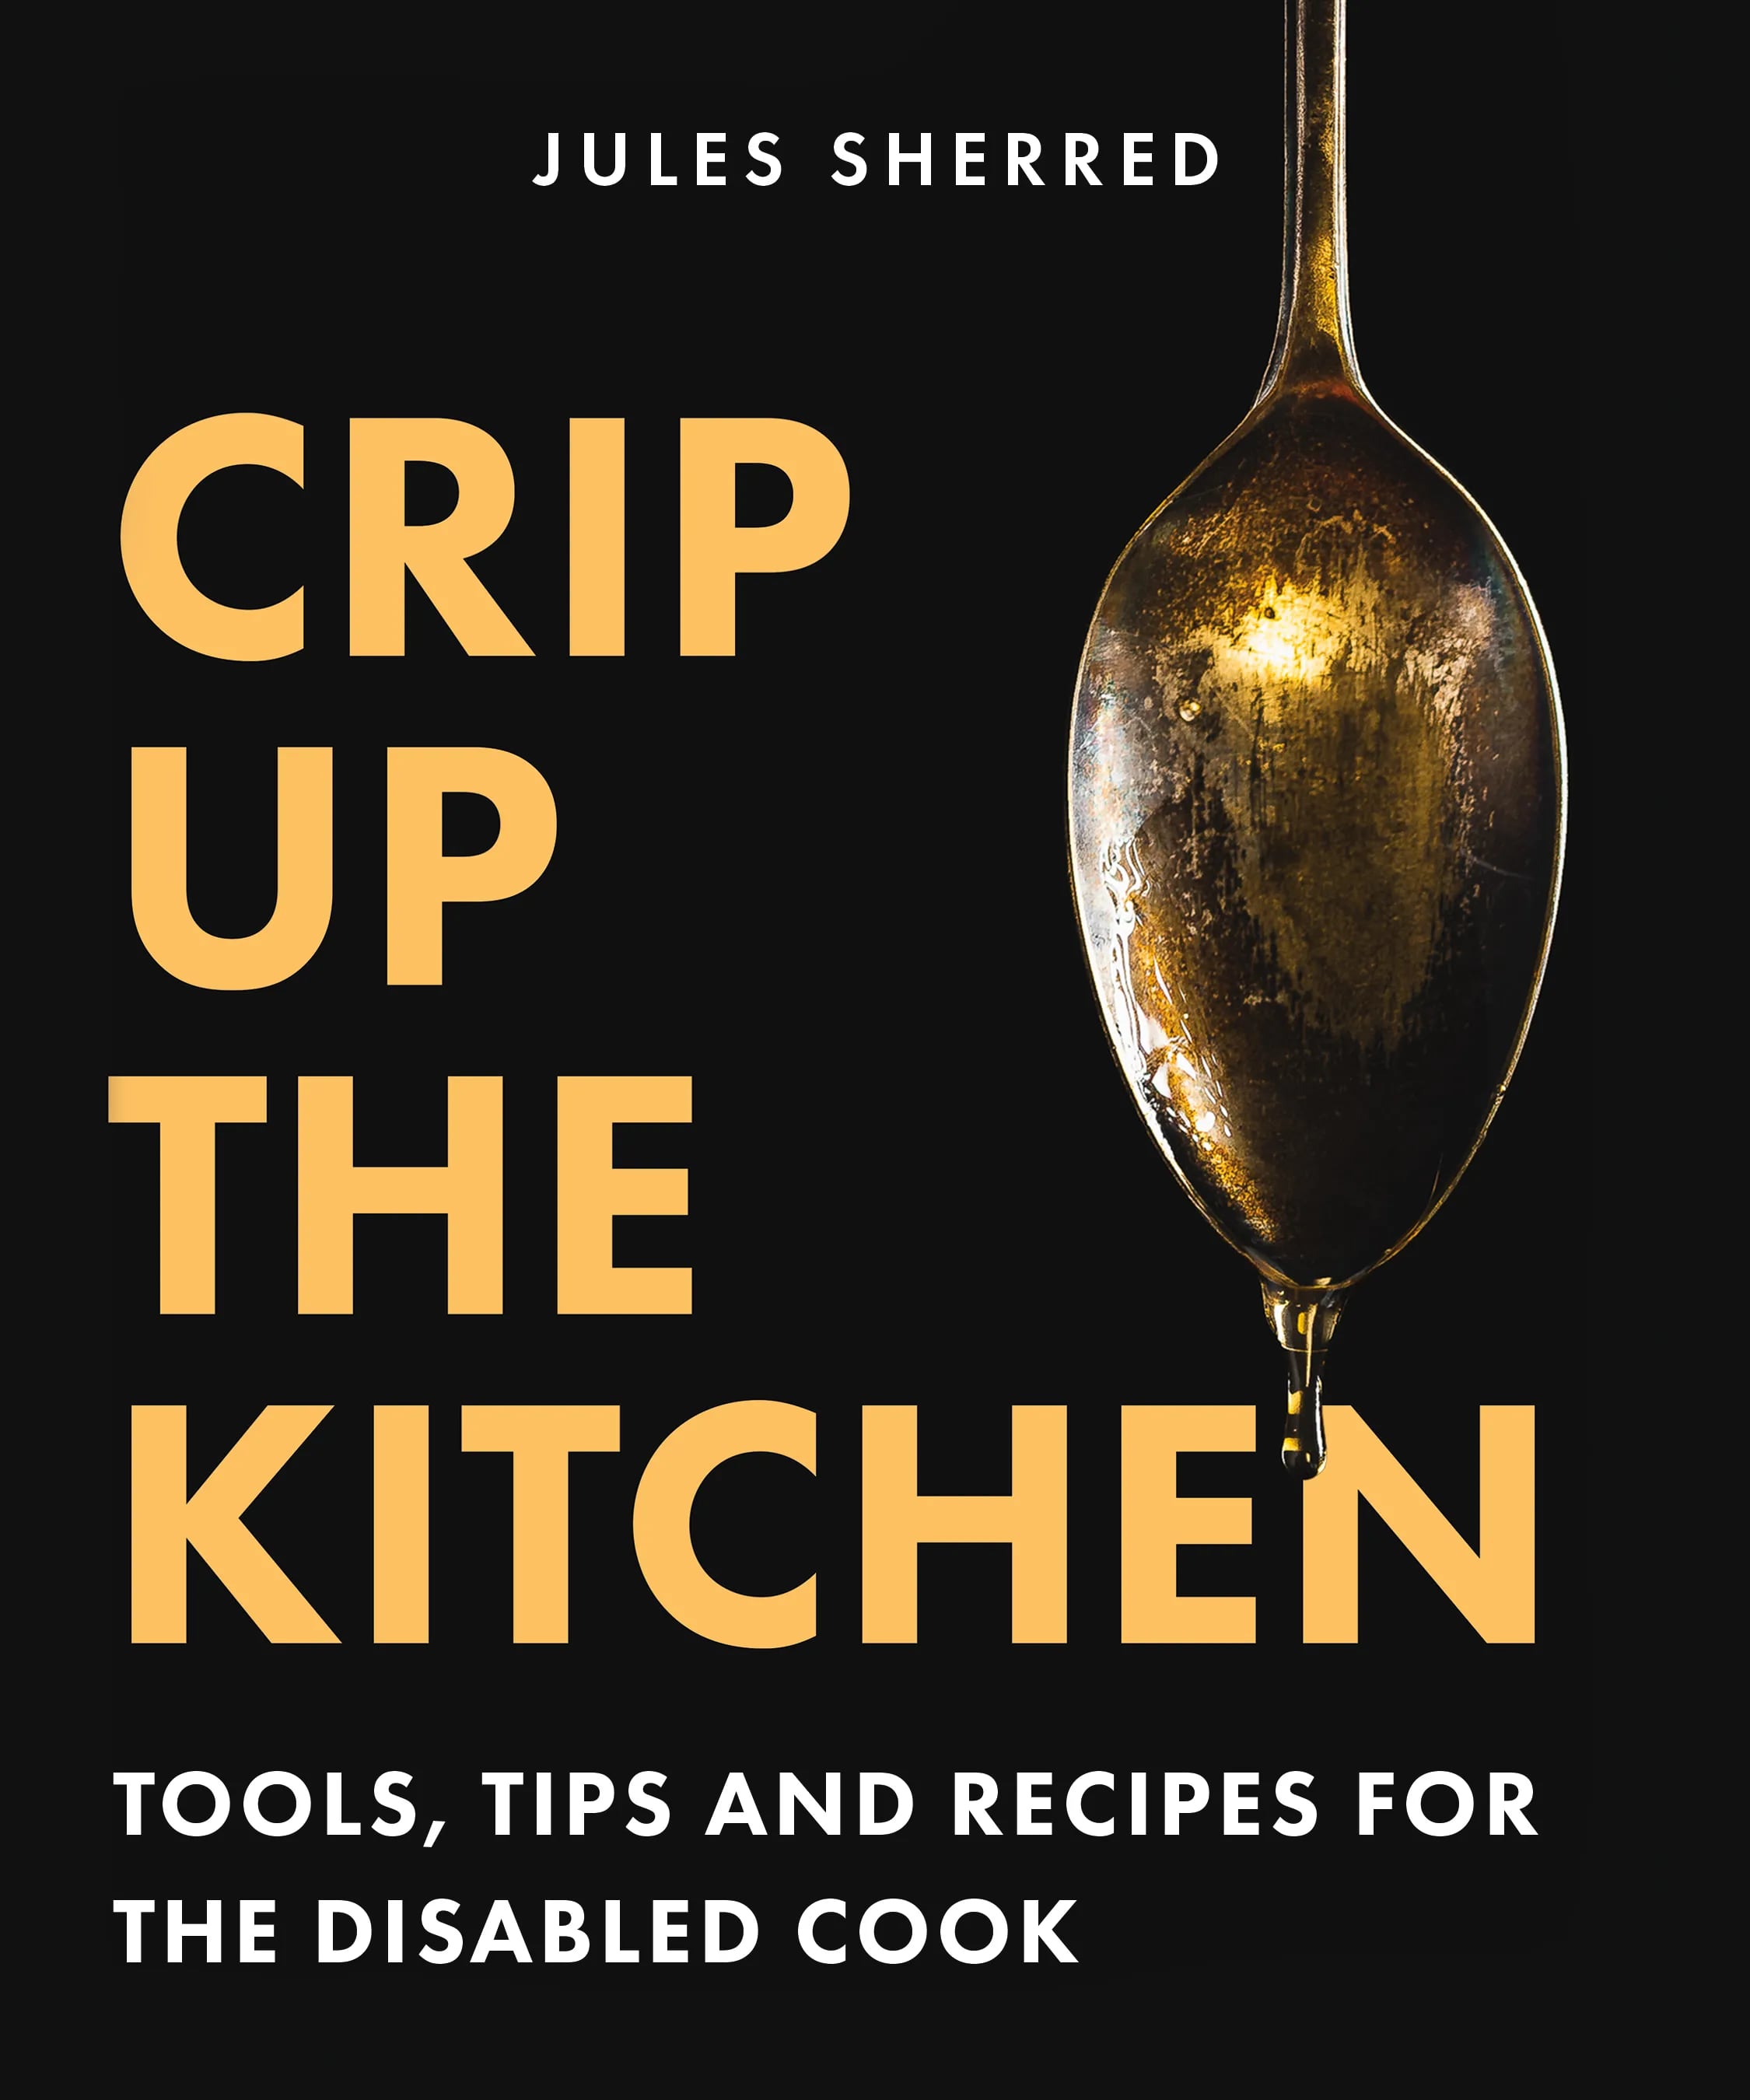 "Crip Up the Kitchen: Tools, tips and recipes for the disabled cook" by Jules Sherred.